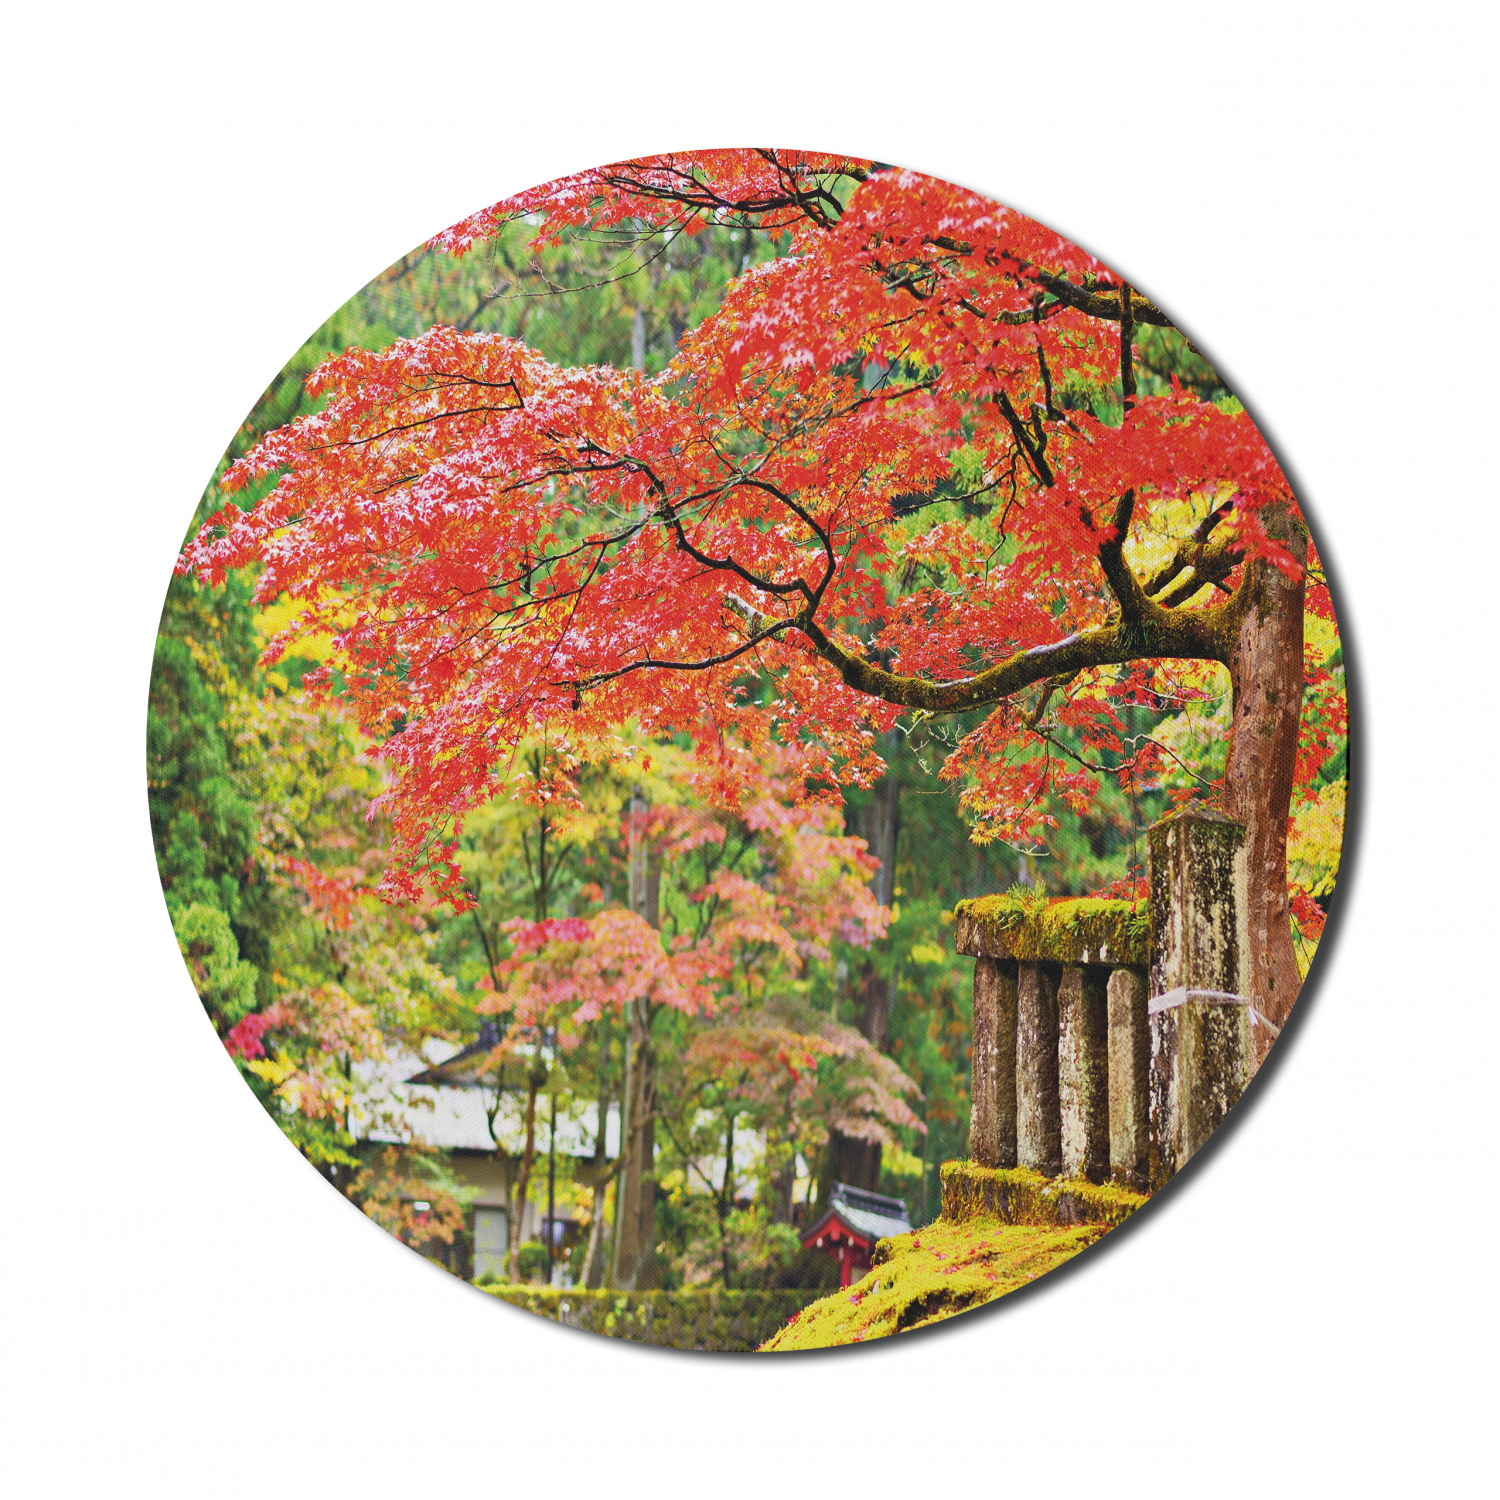 Japanese Mouse Pad for Computers, Autumn Scenery with Sakura Tree Cherry Blooms in Nikko Provinence Japan, Round Non-Slip Thick Rubber Modern Mousepad, 8" Round, Vermilion Green Brown, by Ambesonne - image 1 of 2